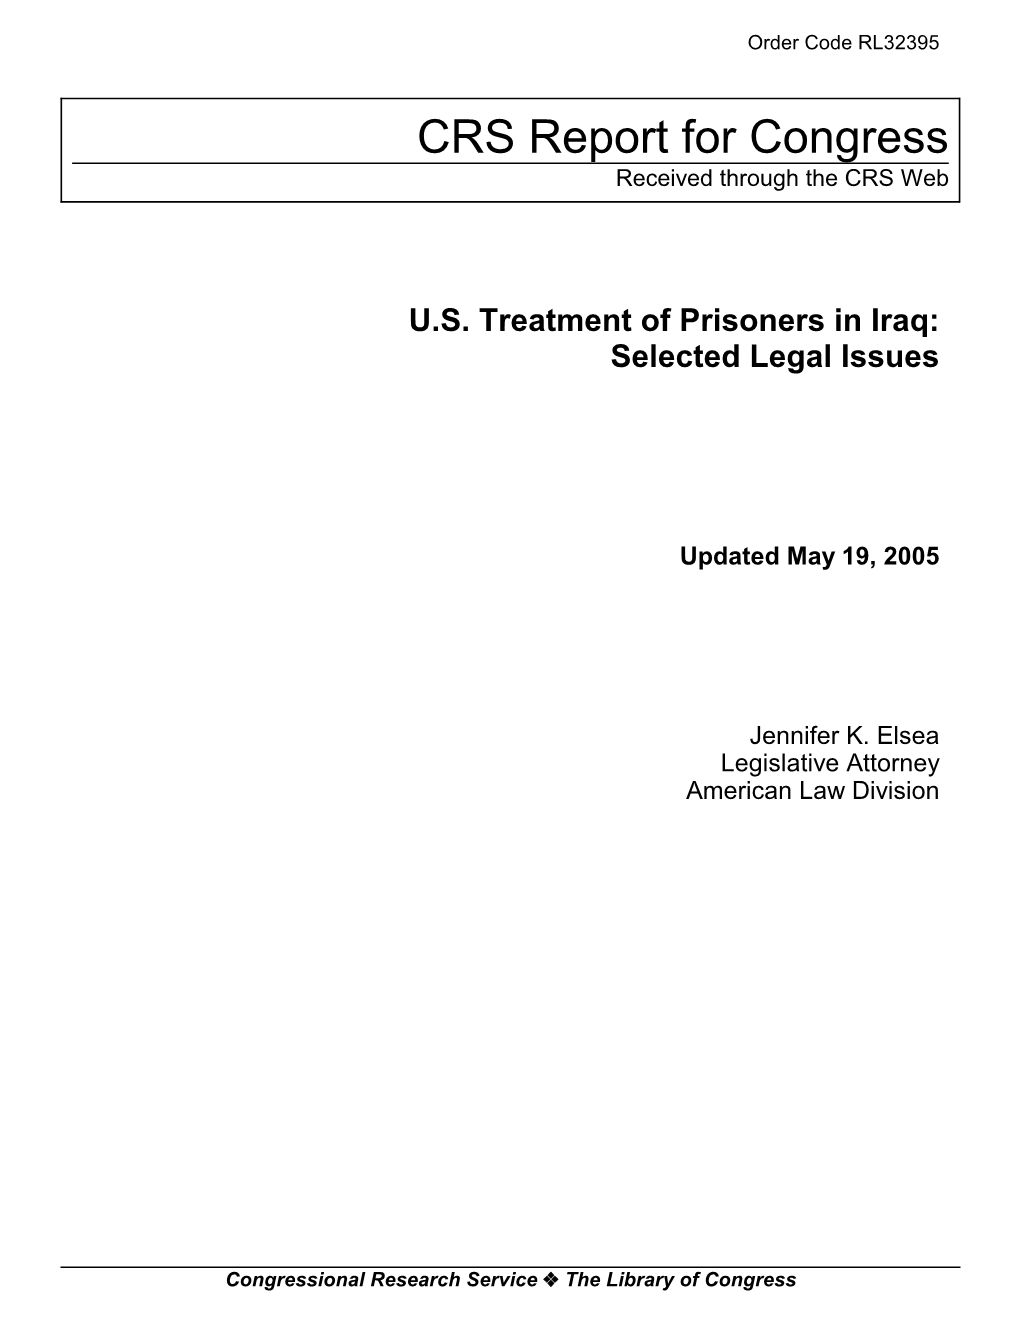 U.S. Treatment of Prisoners in Iraq: Selected Legal Issues